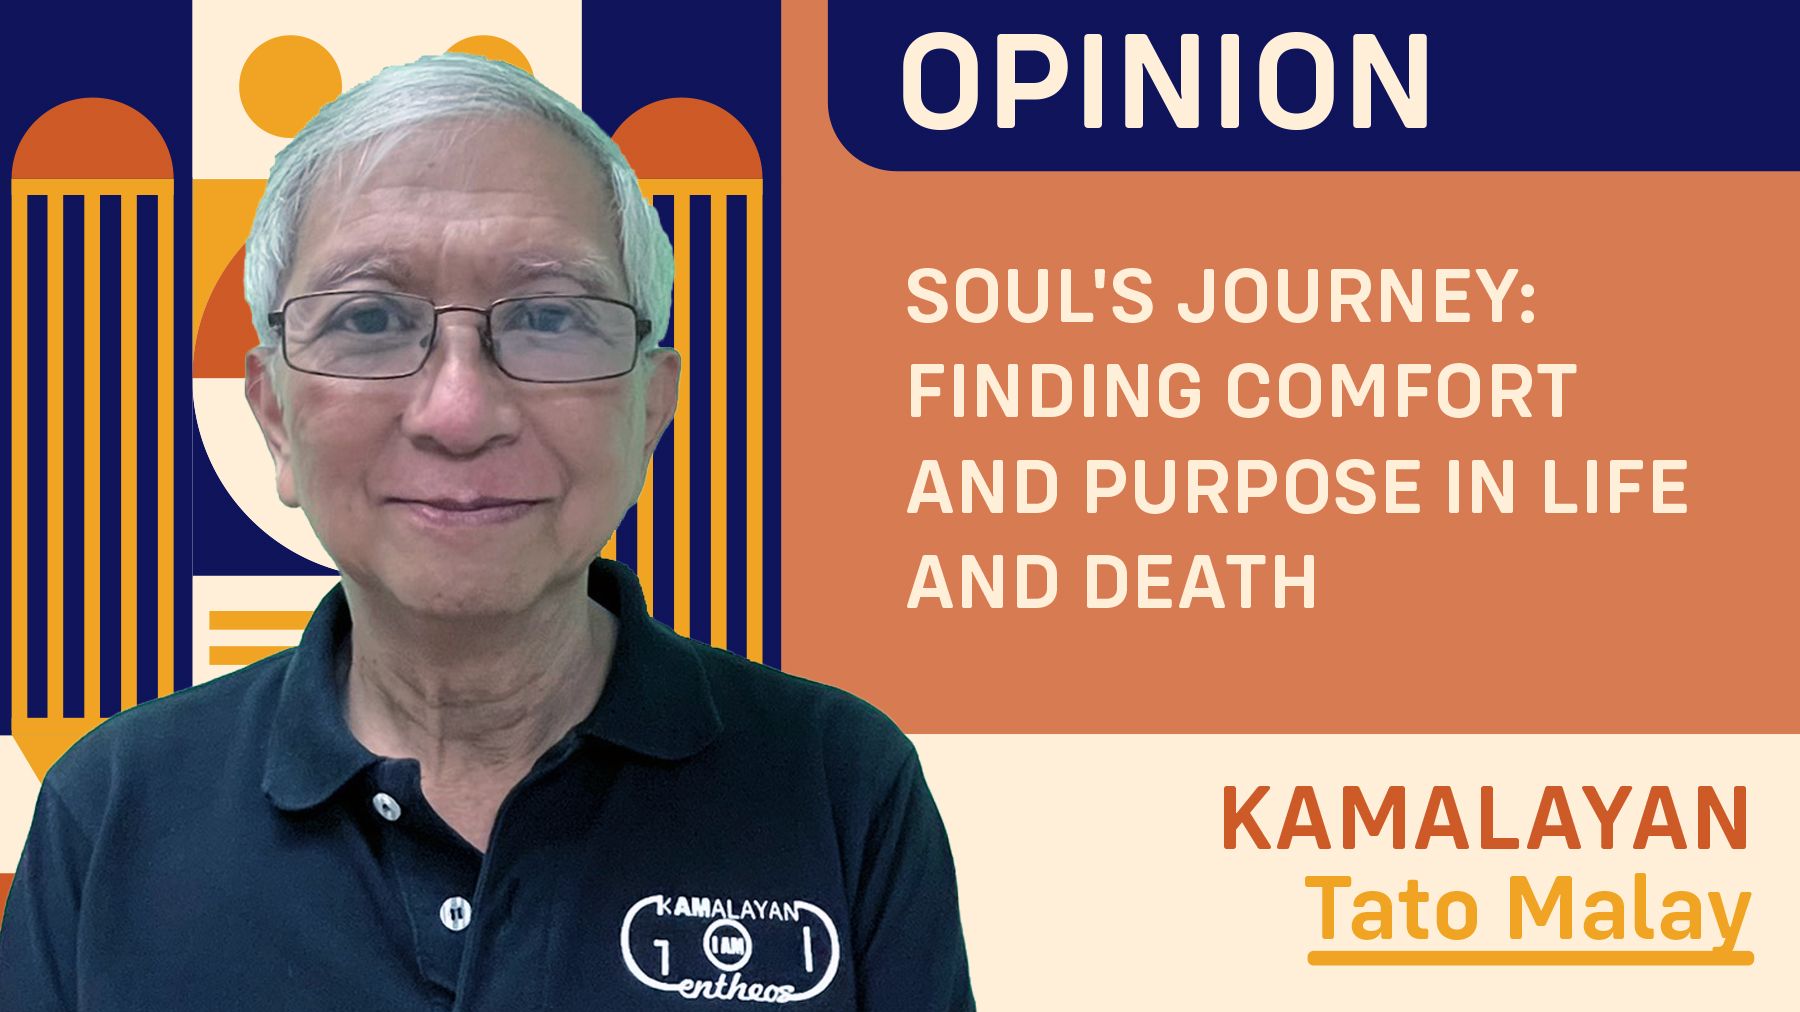 SOUL'S JOURNEY: FINDING COMFORT AND PURPOSE IN LIFE AND DEATH